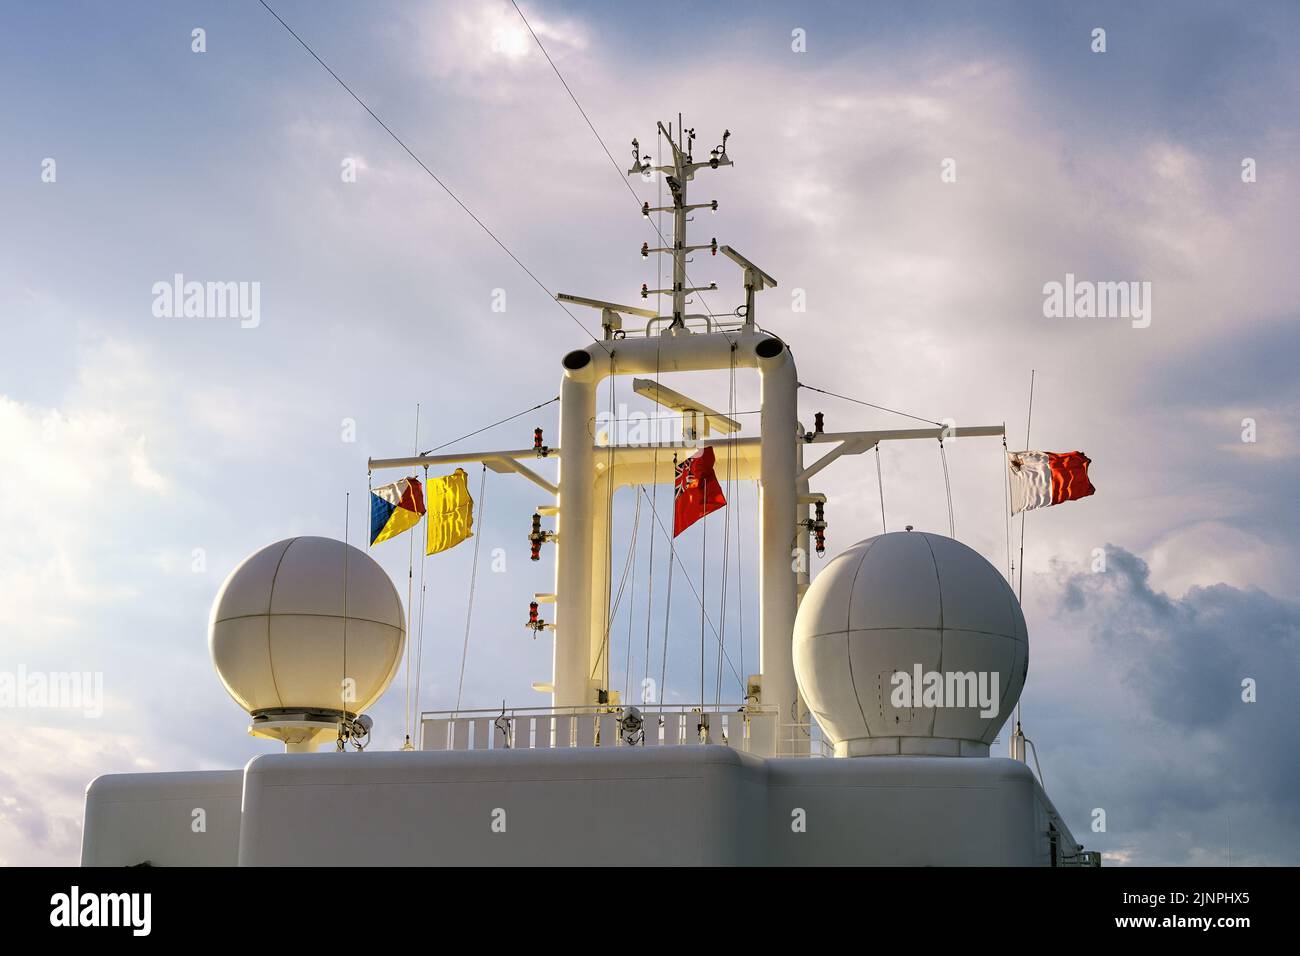 The signal deck of a P&O Cruises cruise ship with satellite domes, house flag, Red Ensign and Maltese courtesy flag - November 2018. Stock Photo